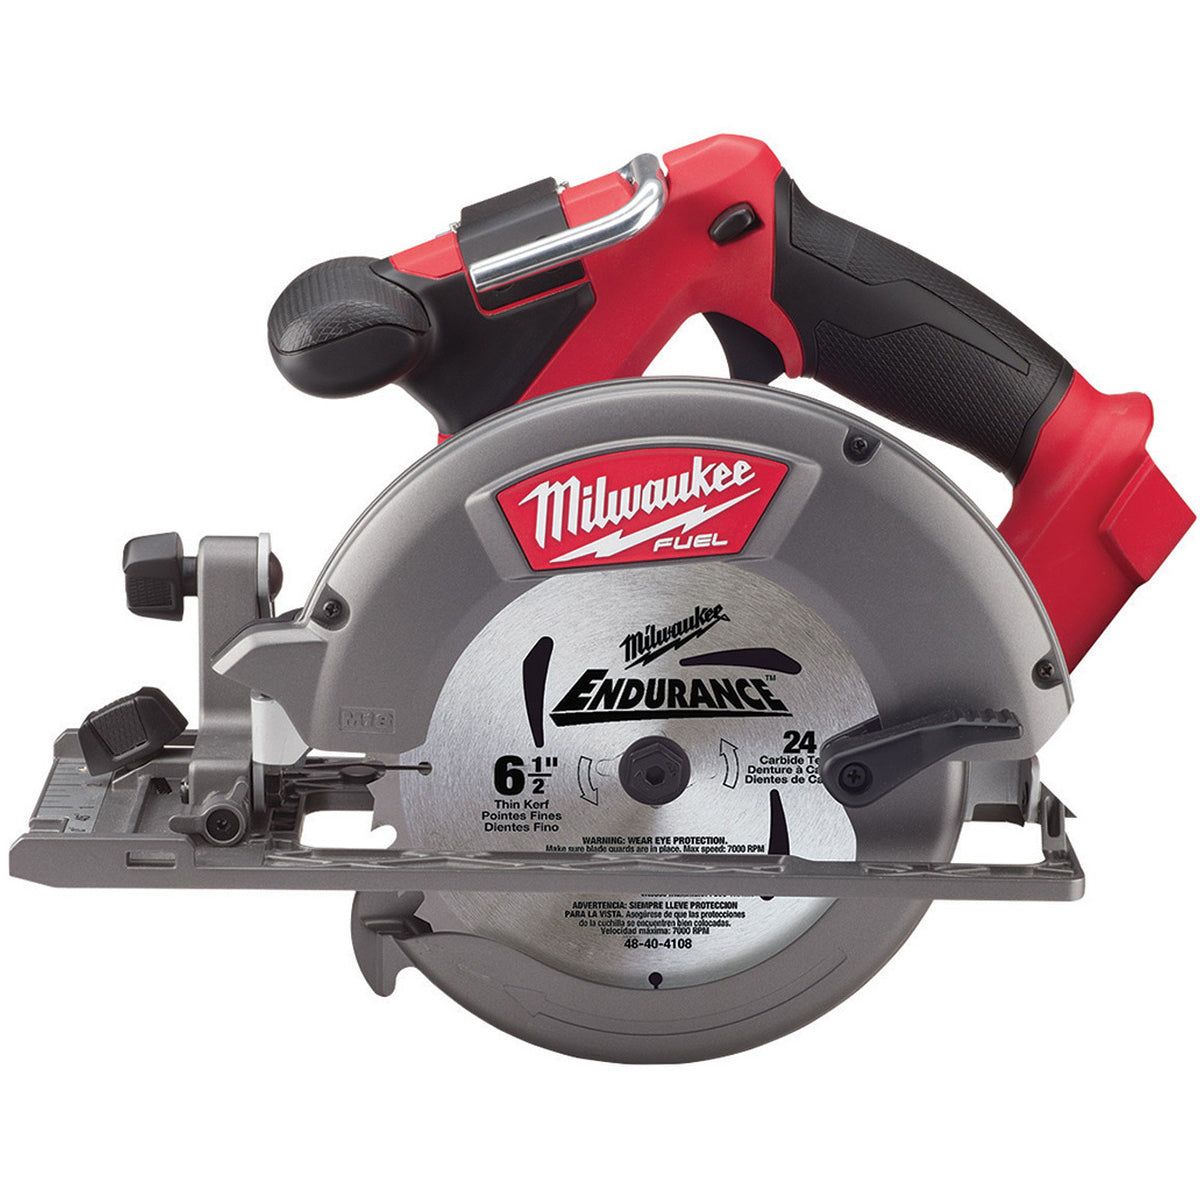 Milwaukee M18CCS55-0 18V Fuel Brushless 165mm Circular Saw with 2 x 5.0Ah Batteries M18B5